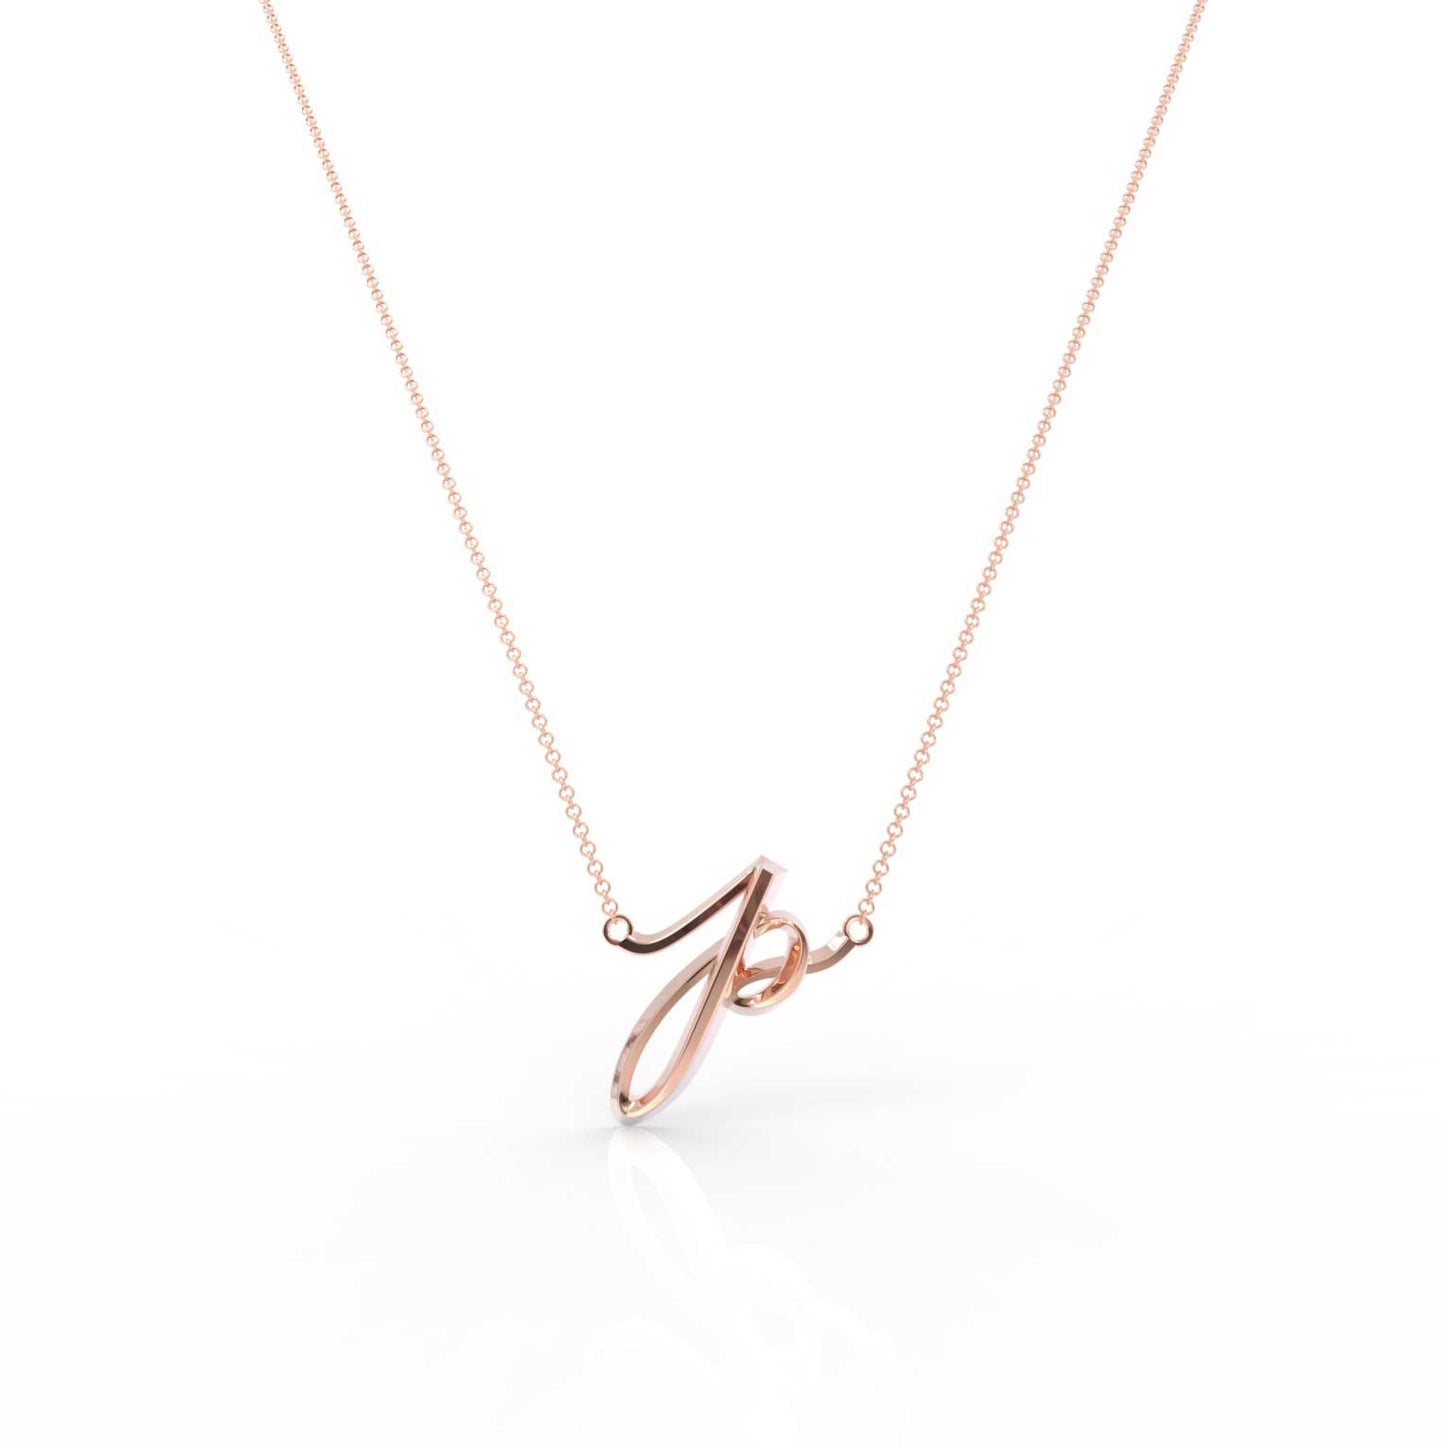 The Love Collect - "P" Necklace